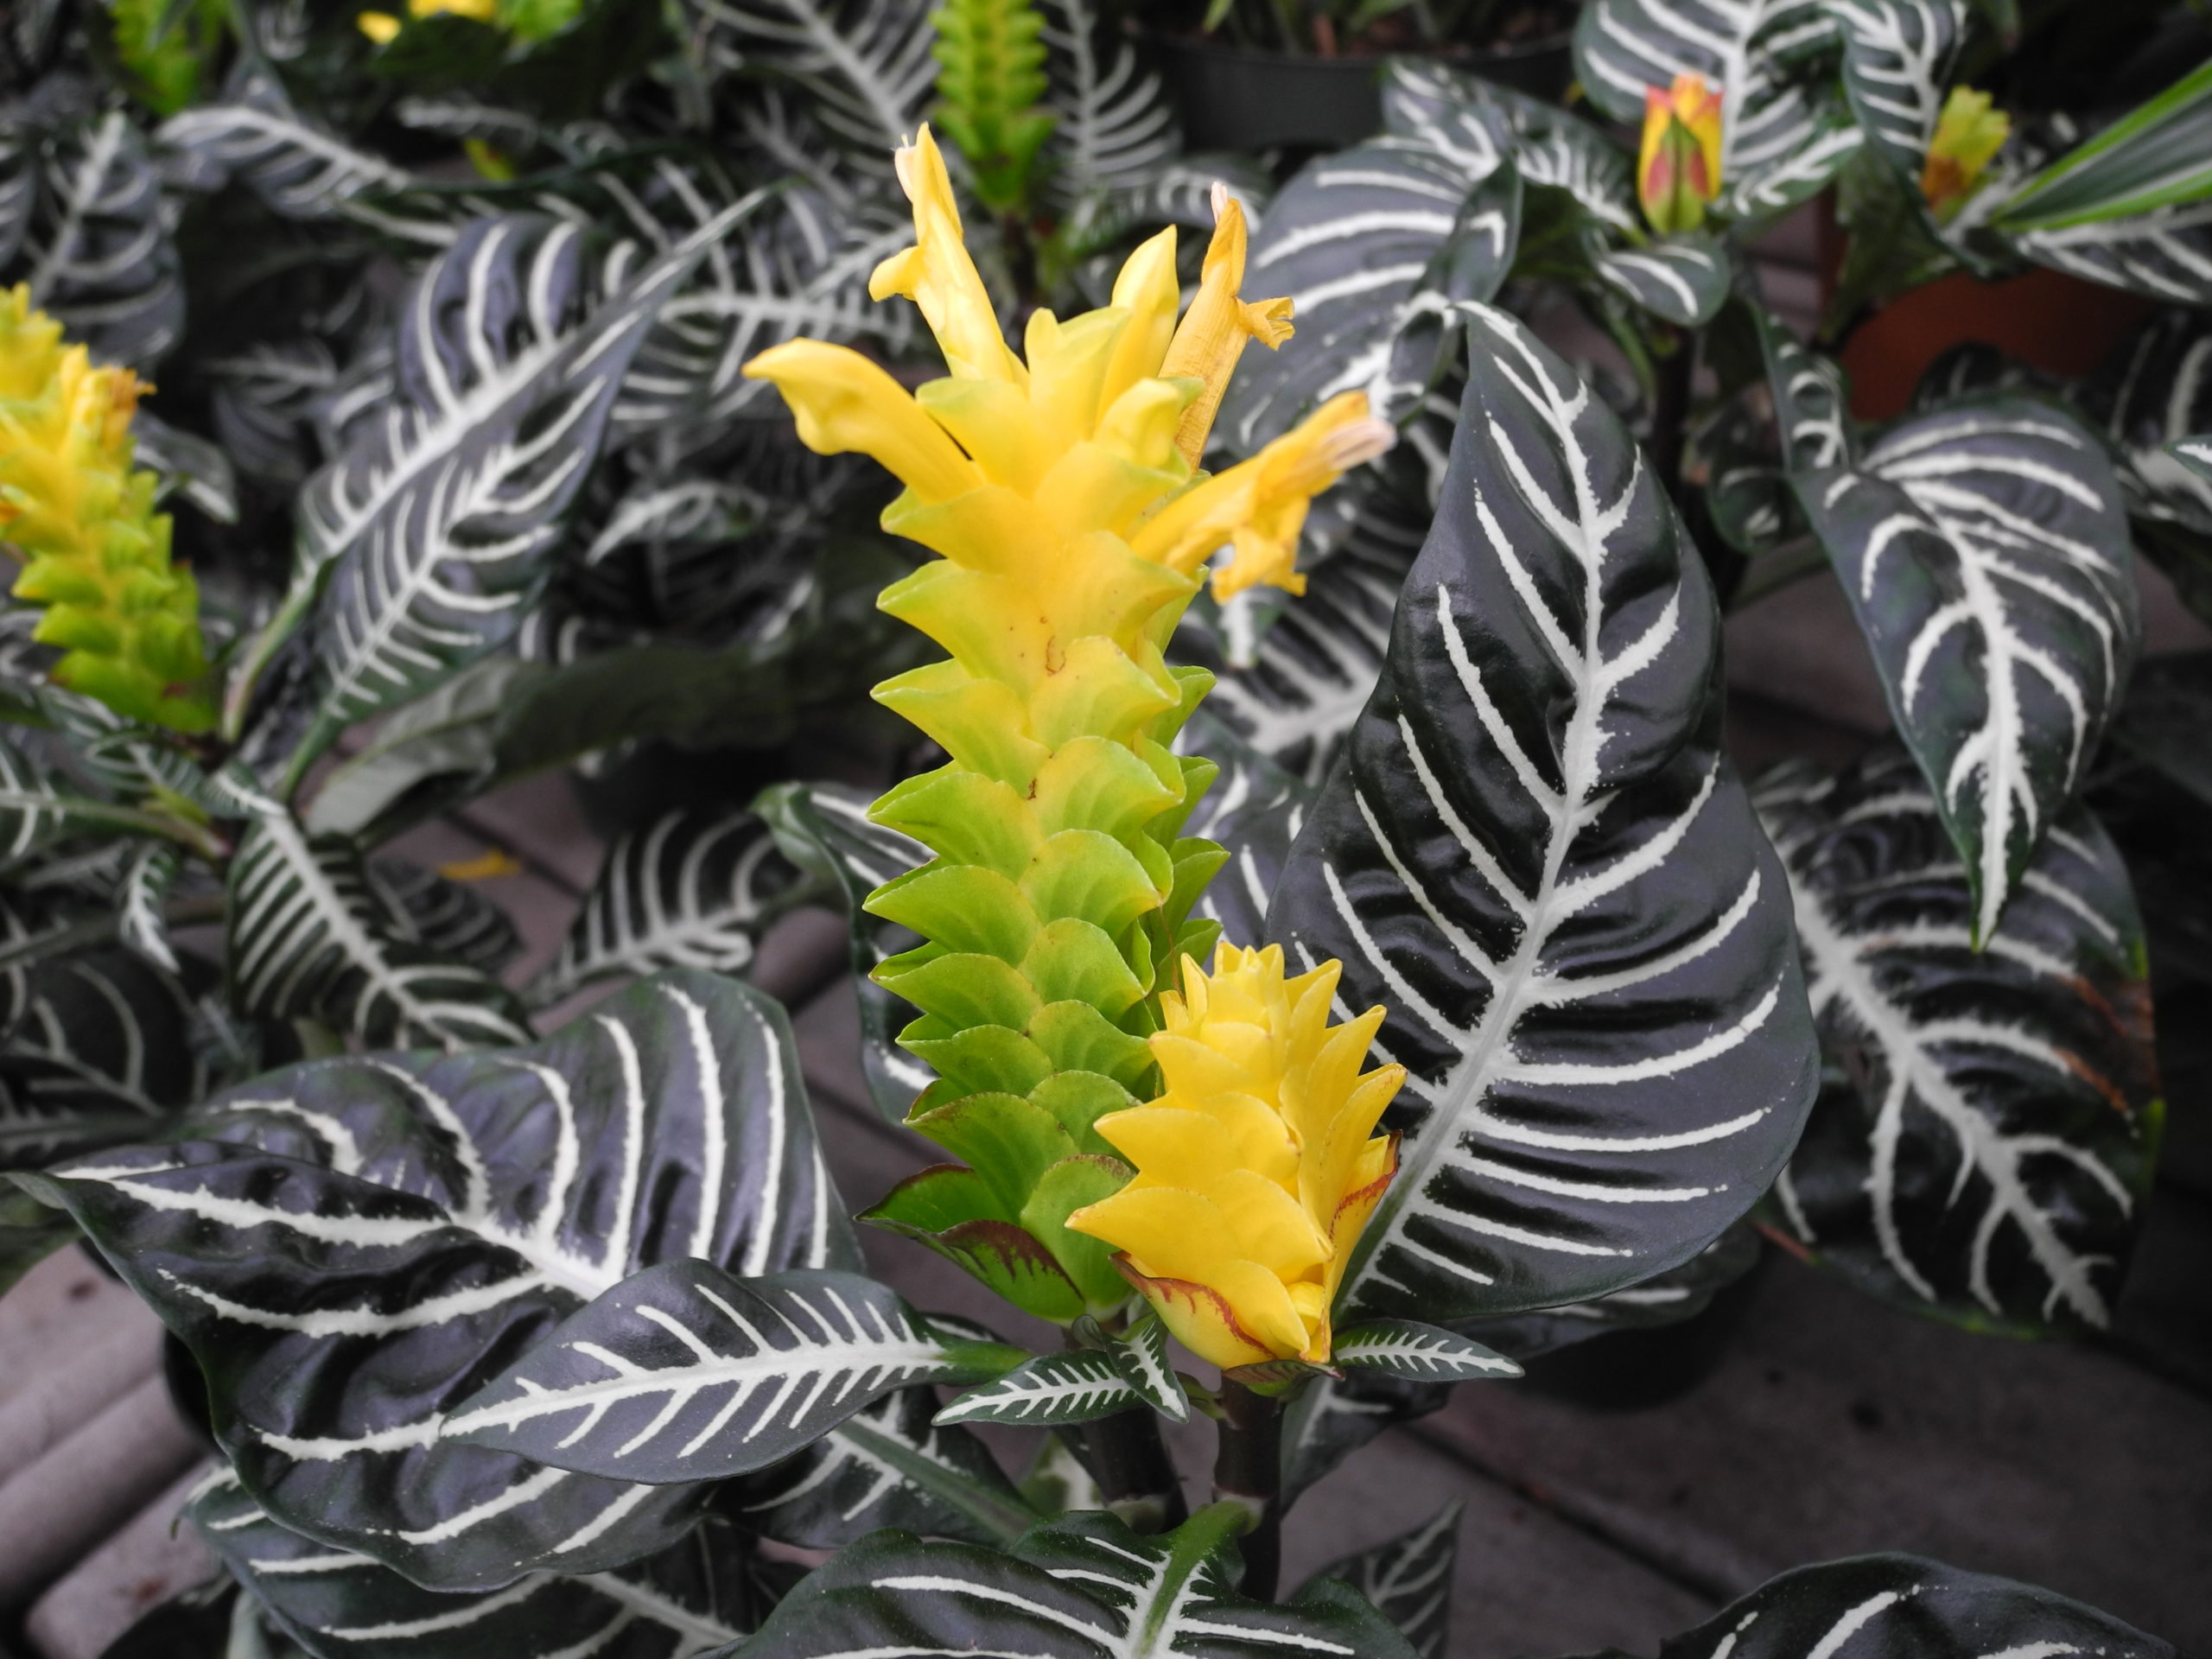 Zebra with leaves and flower